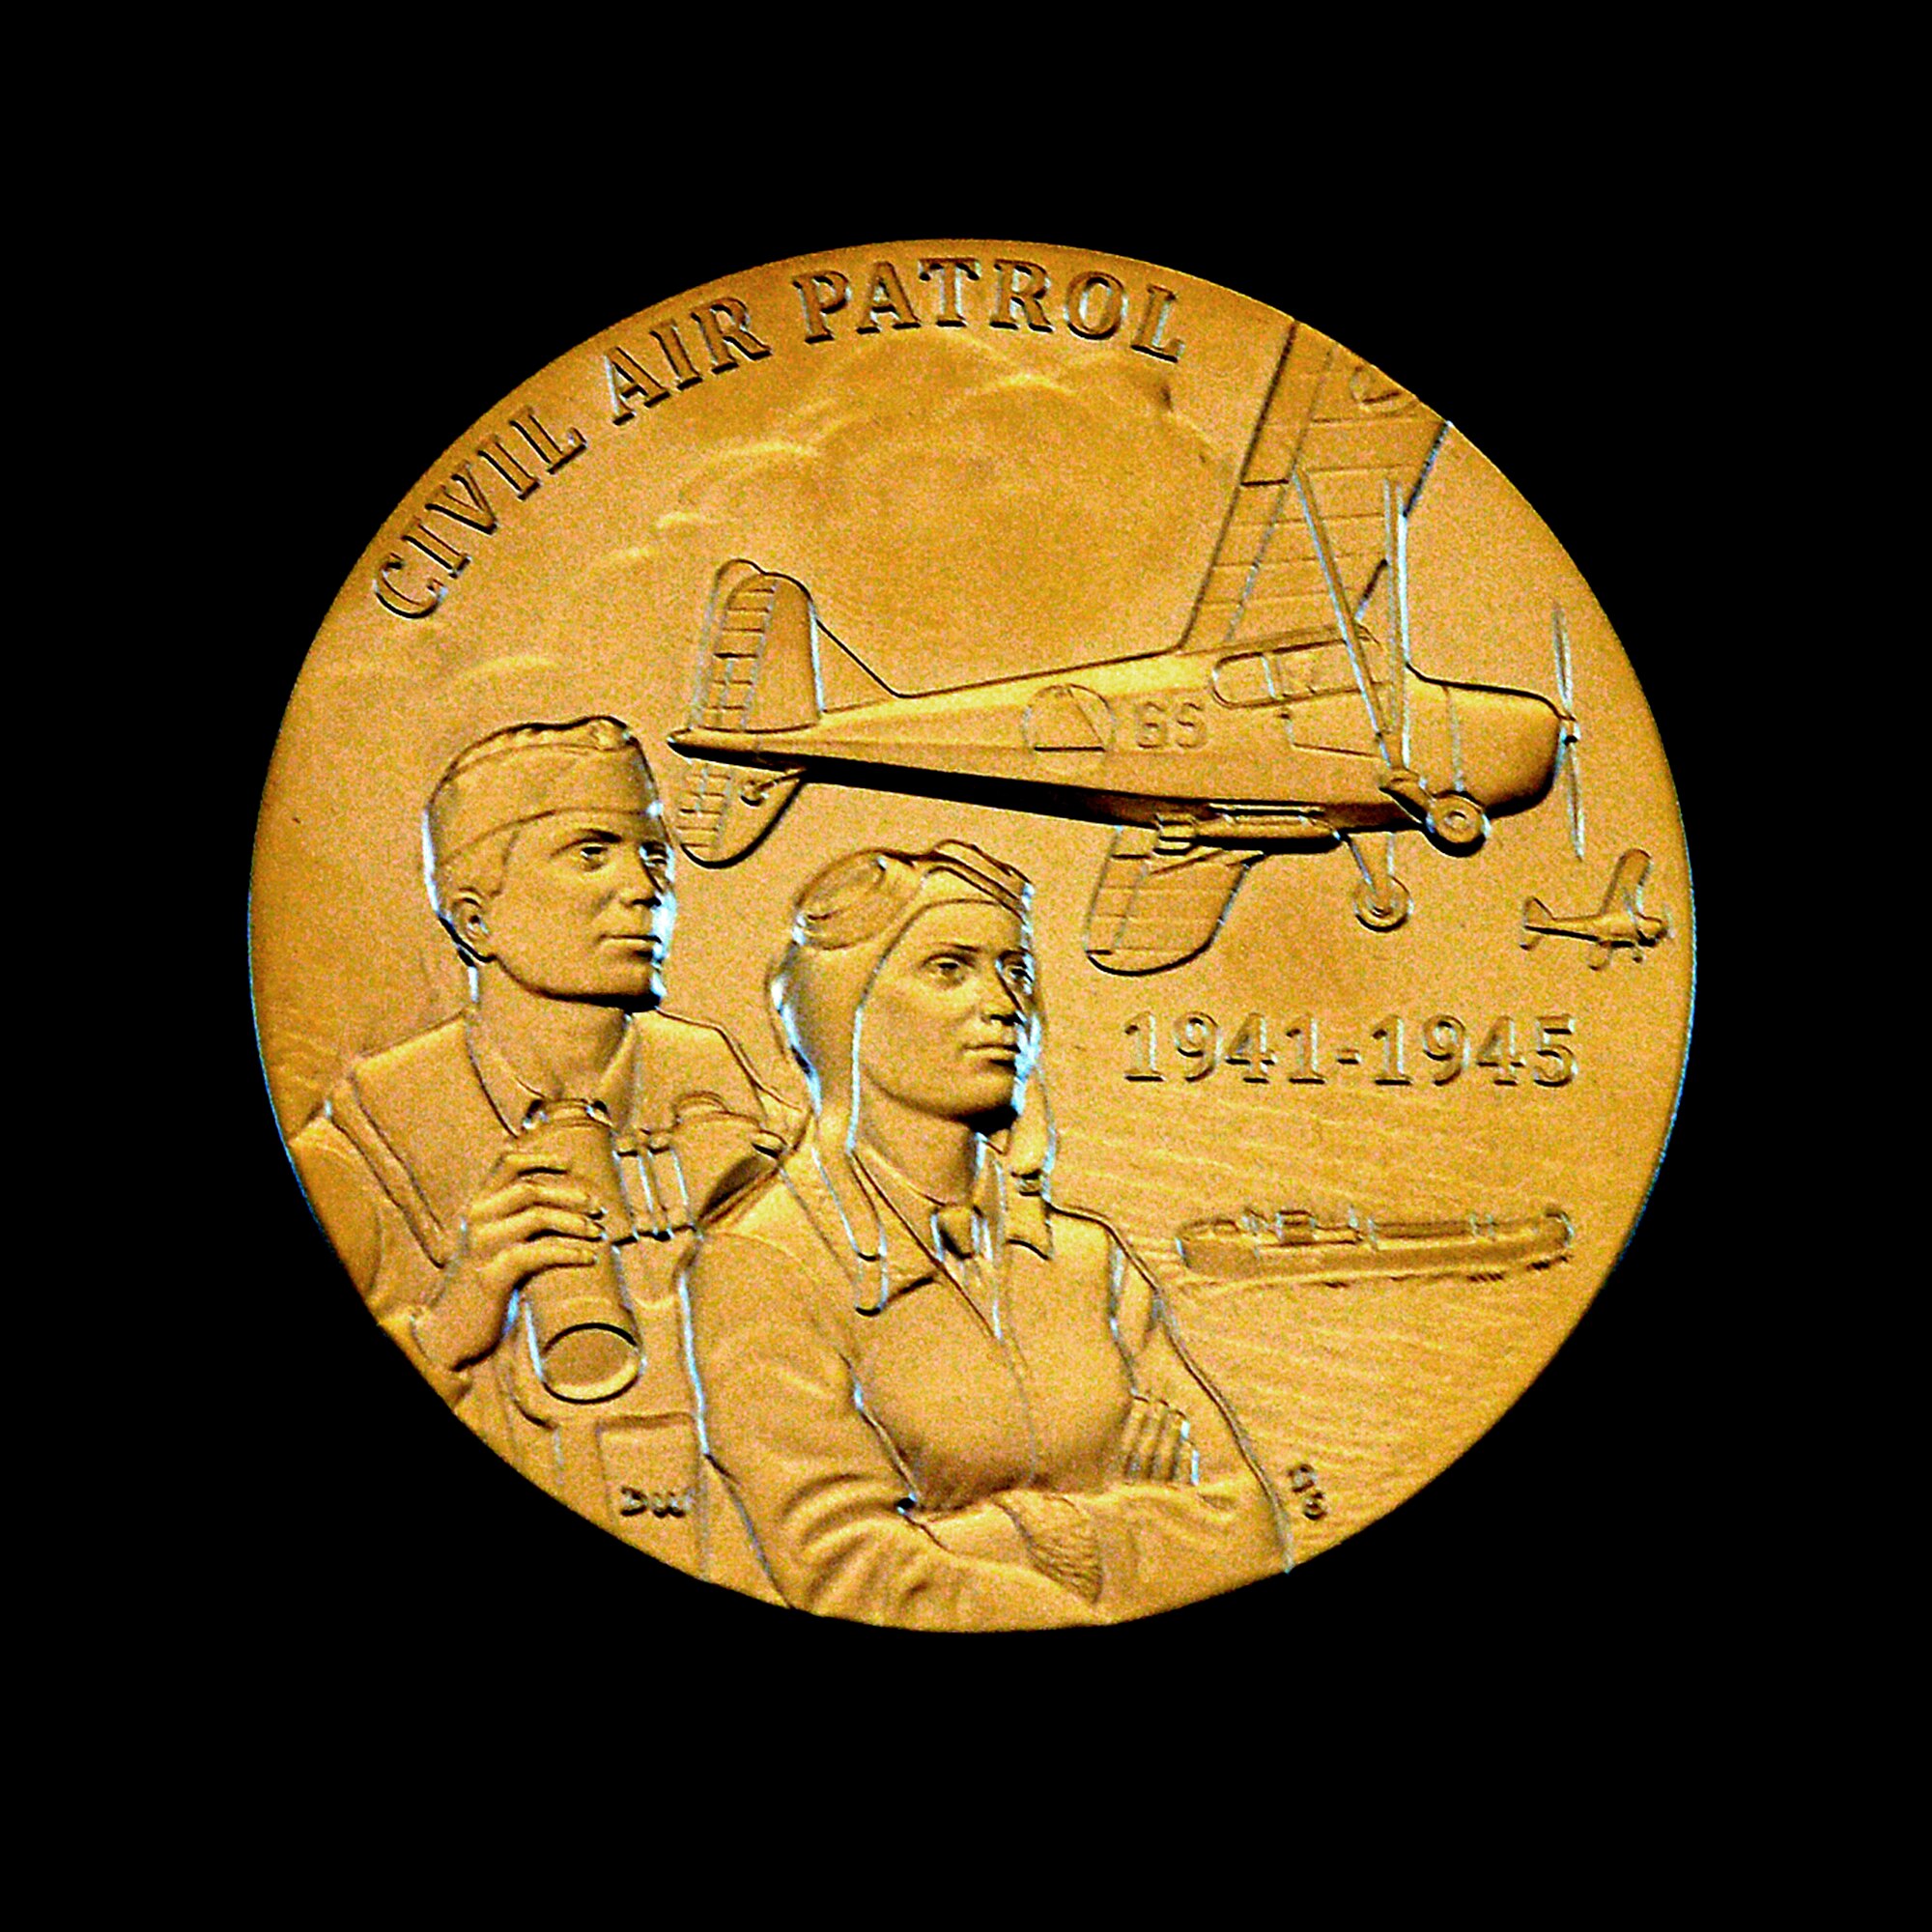 A close up of the Congressional Gold Medal presented by Speaker of the House of Representatives John Boehner to the Civil Air Patrol in honor of the World War II members during a ceremony Dec. 10, 2014 on Capitol Hill, Washington, D.C.  (U.S. Air Force/Andy Morataya)